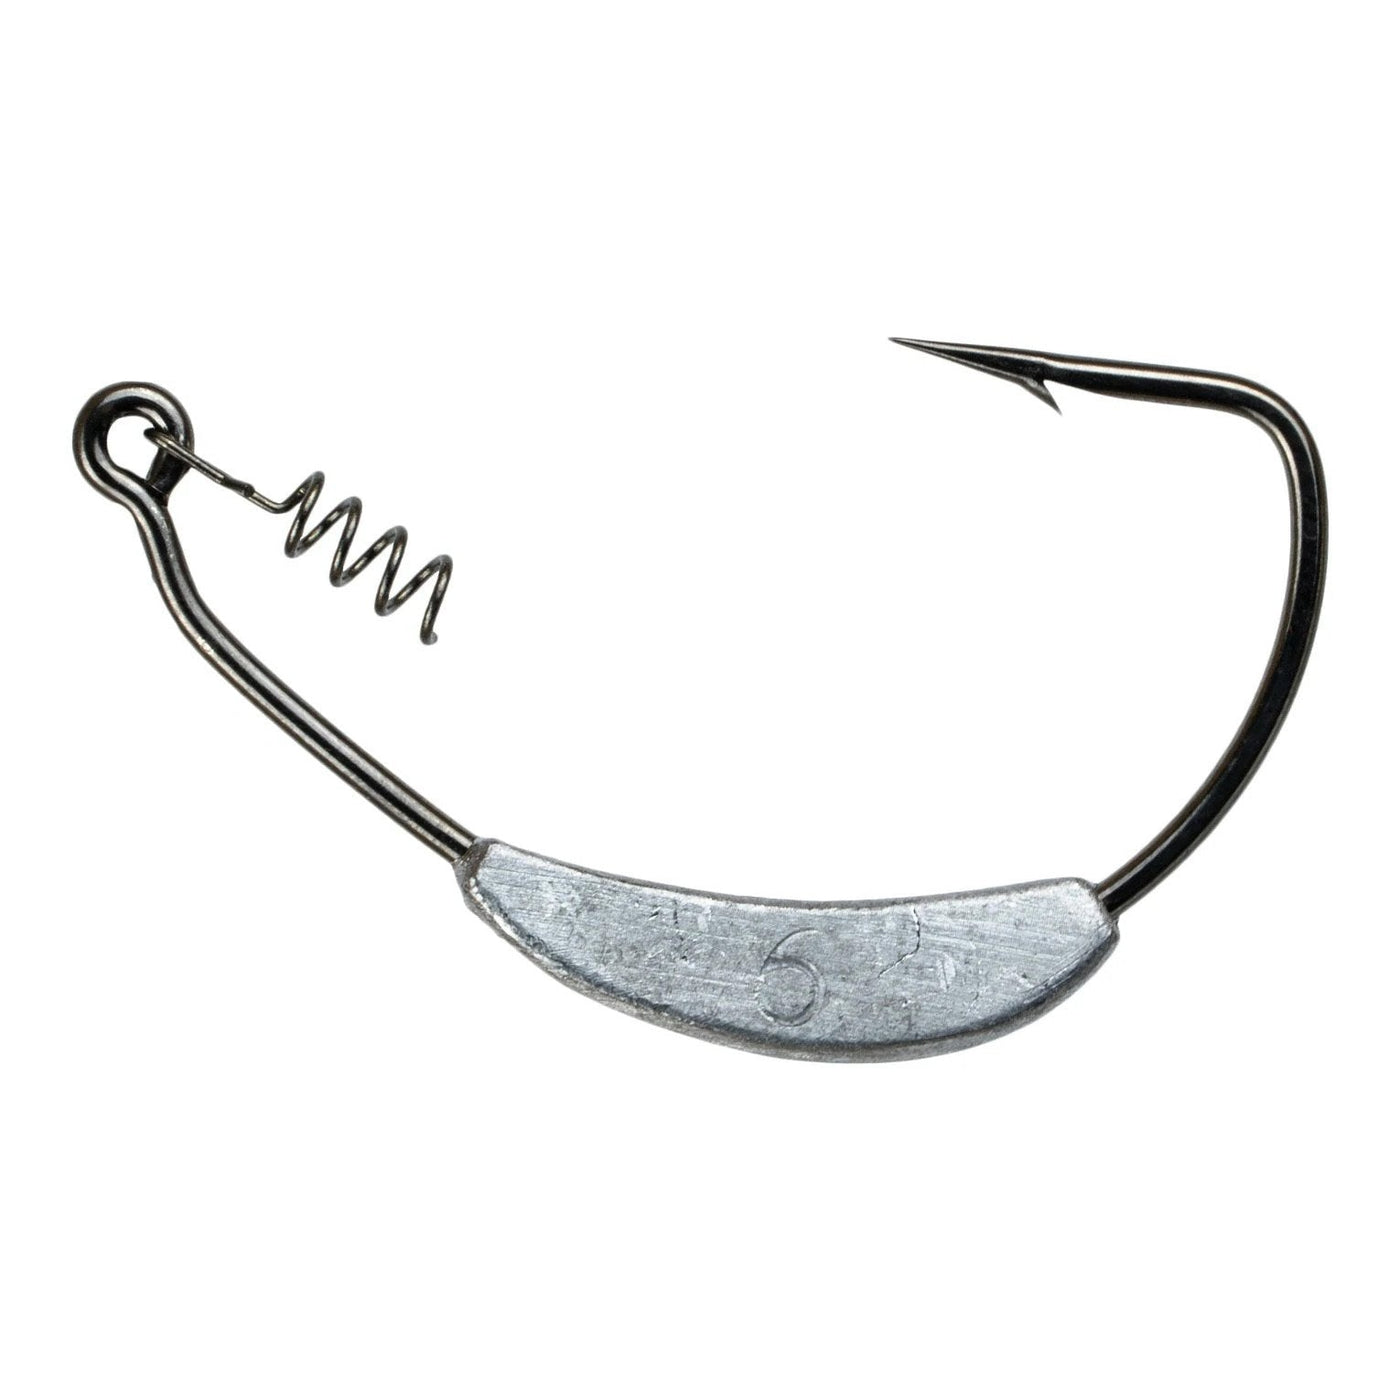 6th Sense - Keel Weighted Hook Tackle 6th Sense Lure Co 